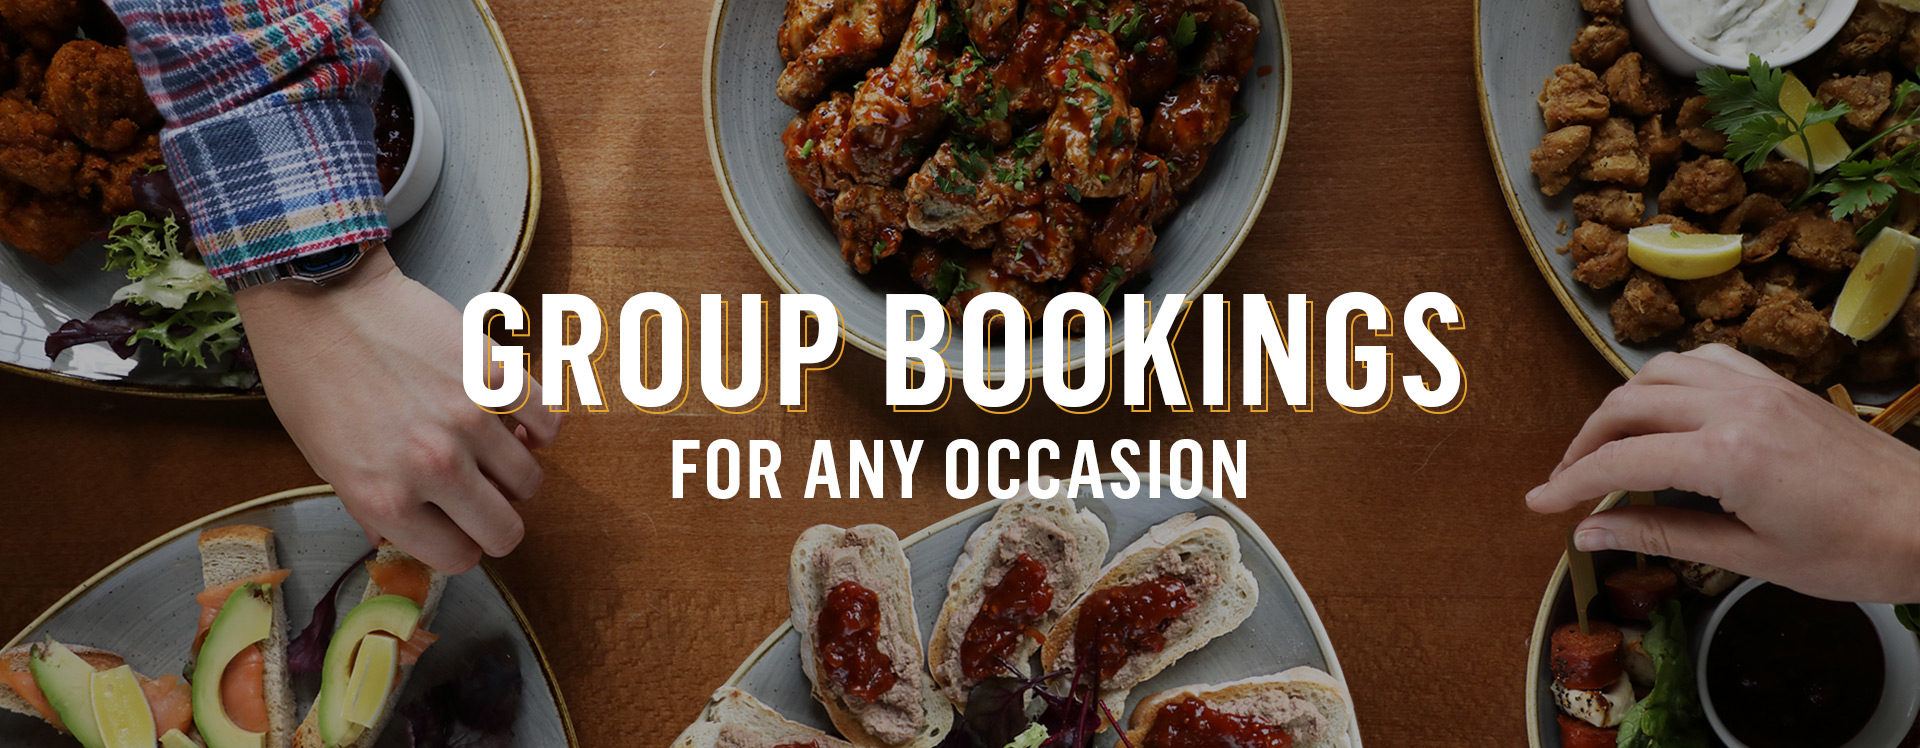 Group Bookings at The Old Bell Tavern